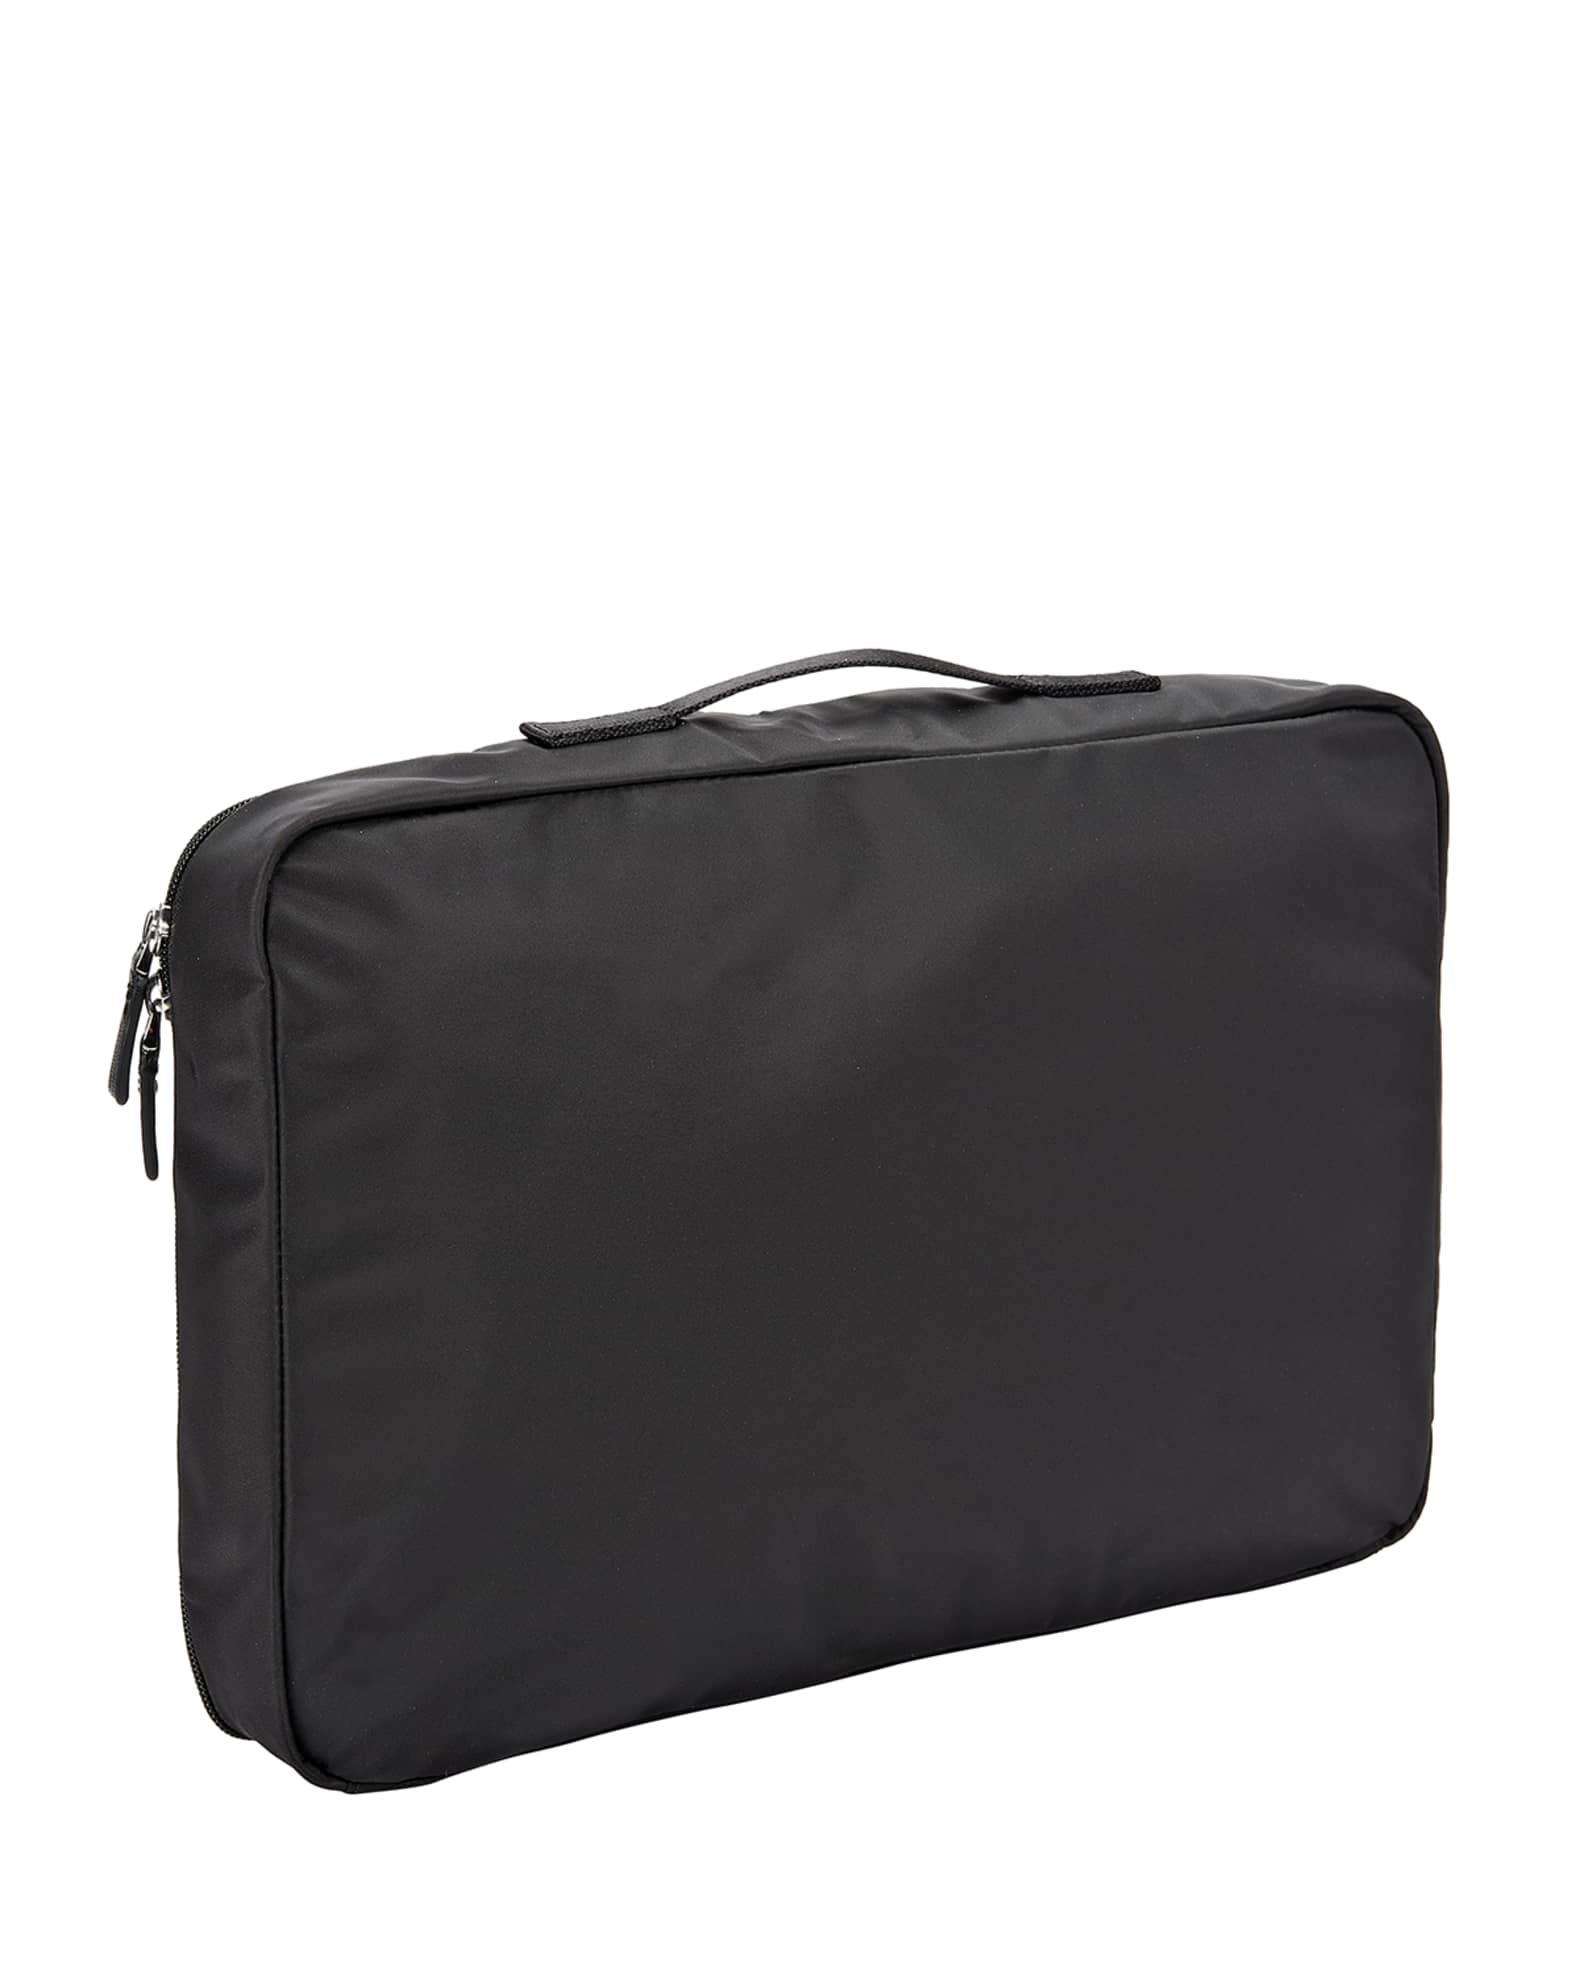 Tumi Travel Access Large Packing Cube | Neiman Marcus